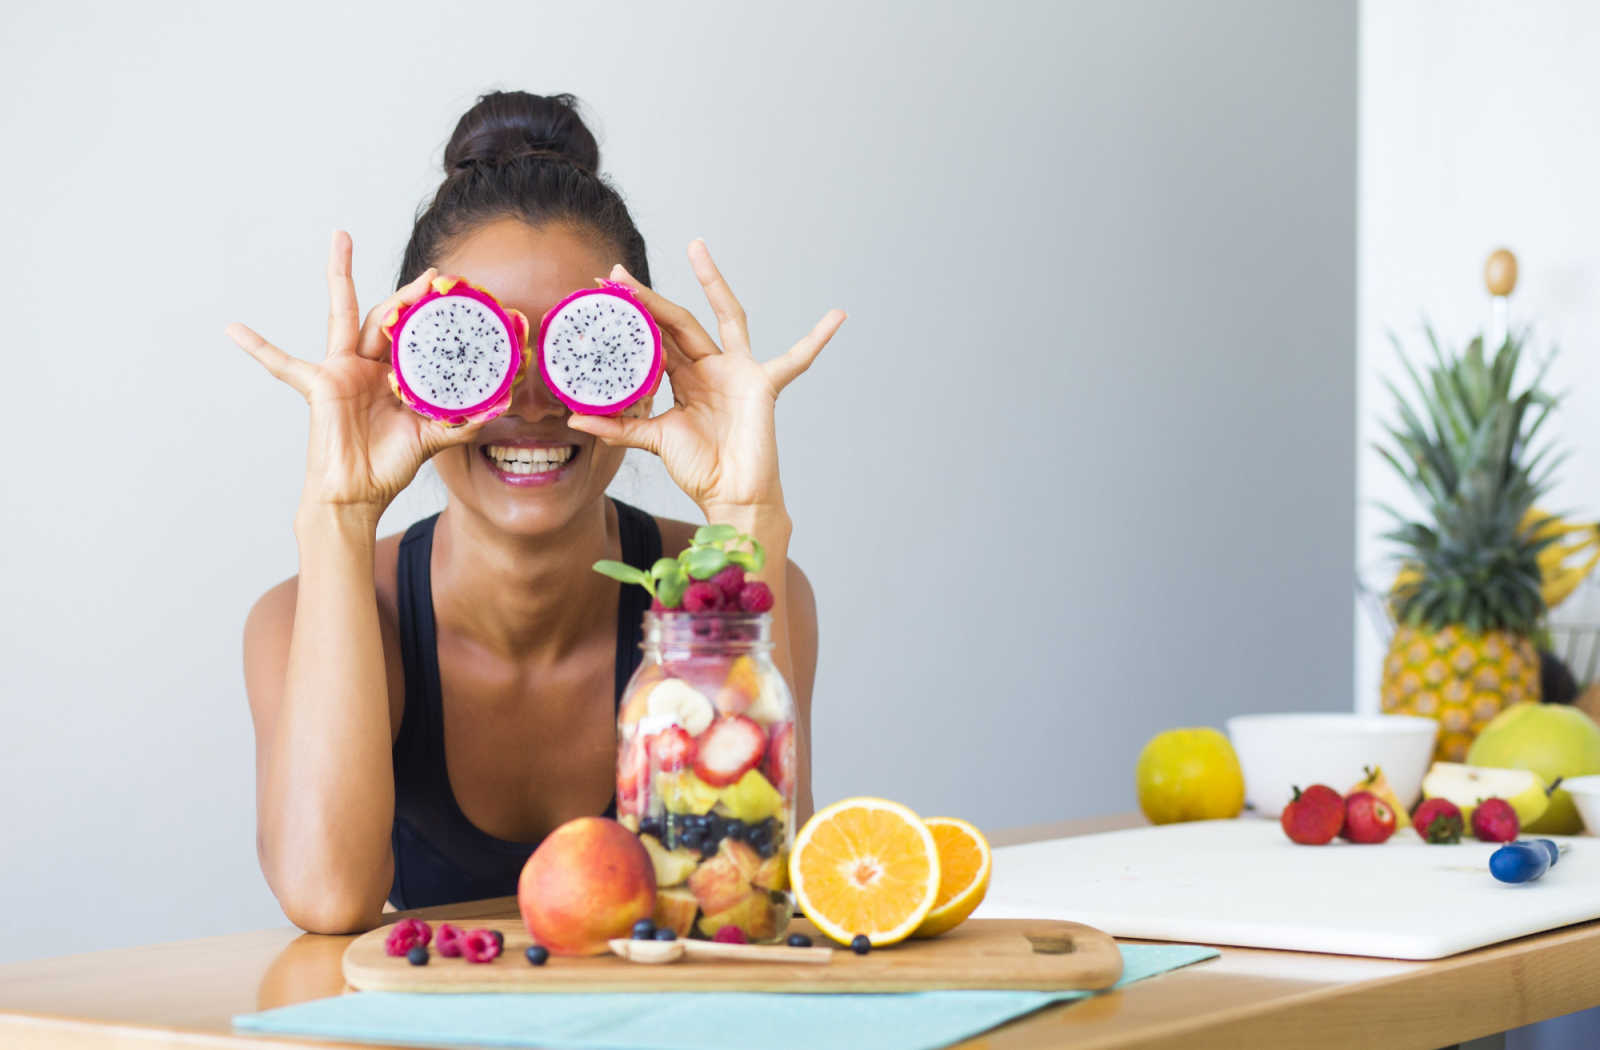 A smiling woman holds two two pieces of dragonfruit in front of her eyes, with other cut up fruits laid in front of her on a table.